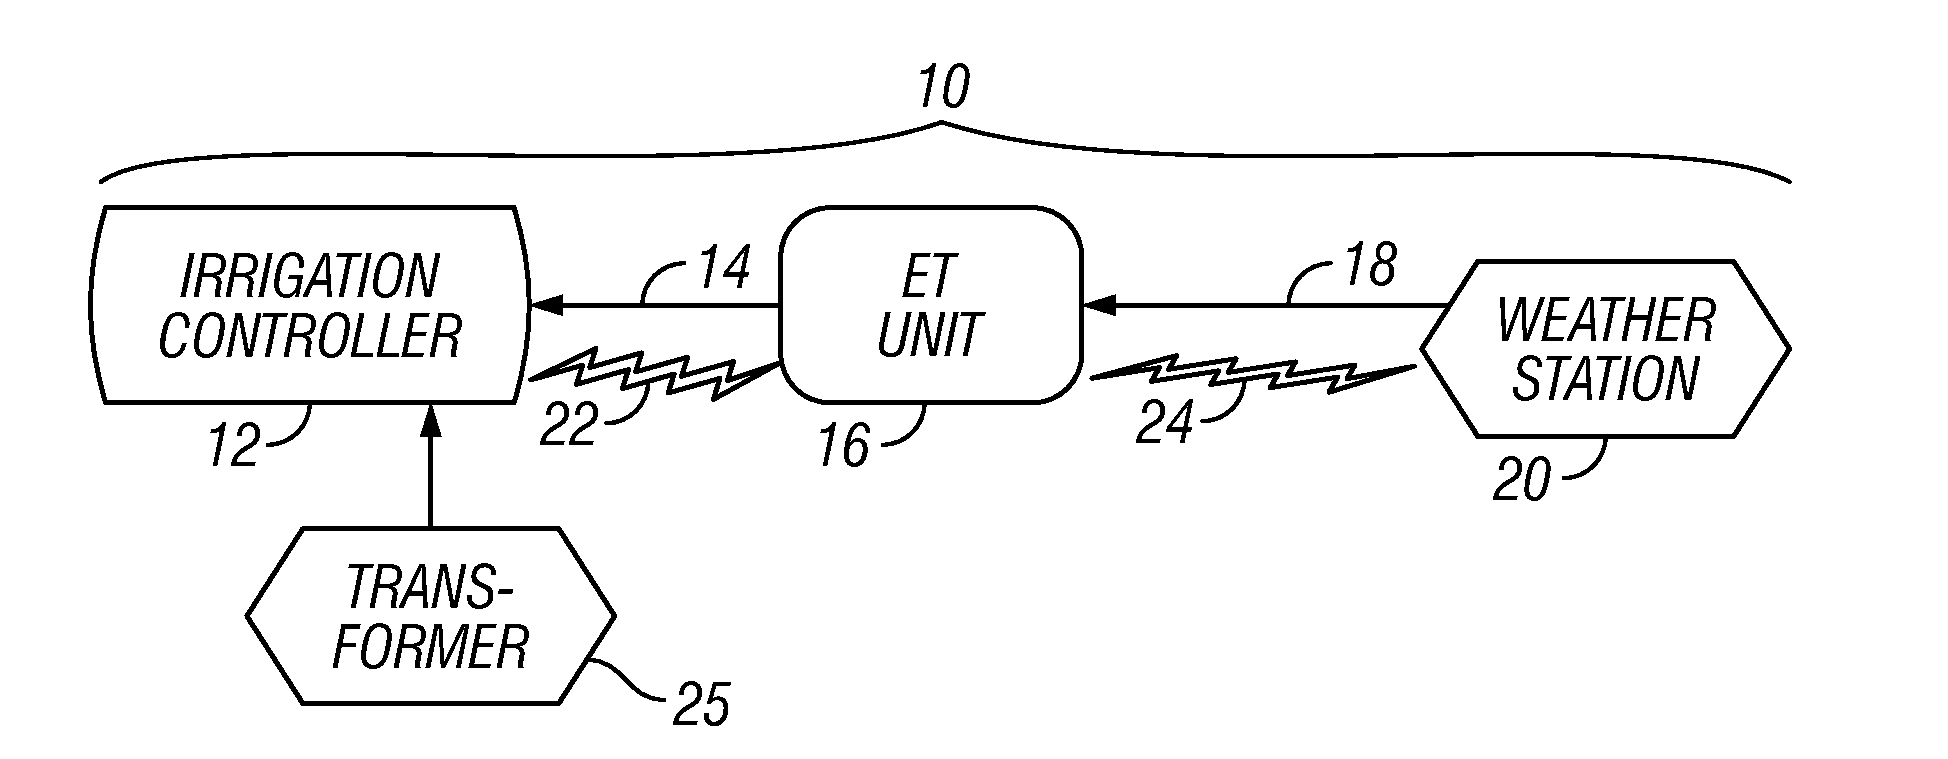 Irrigation System with ET Based Seasonal Watering Adjustment